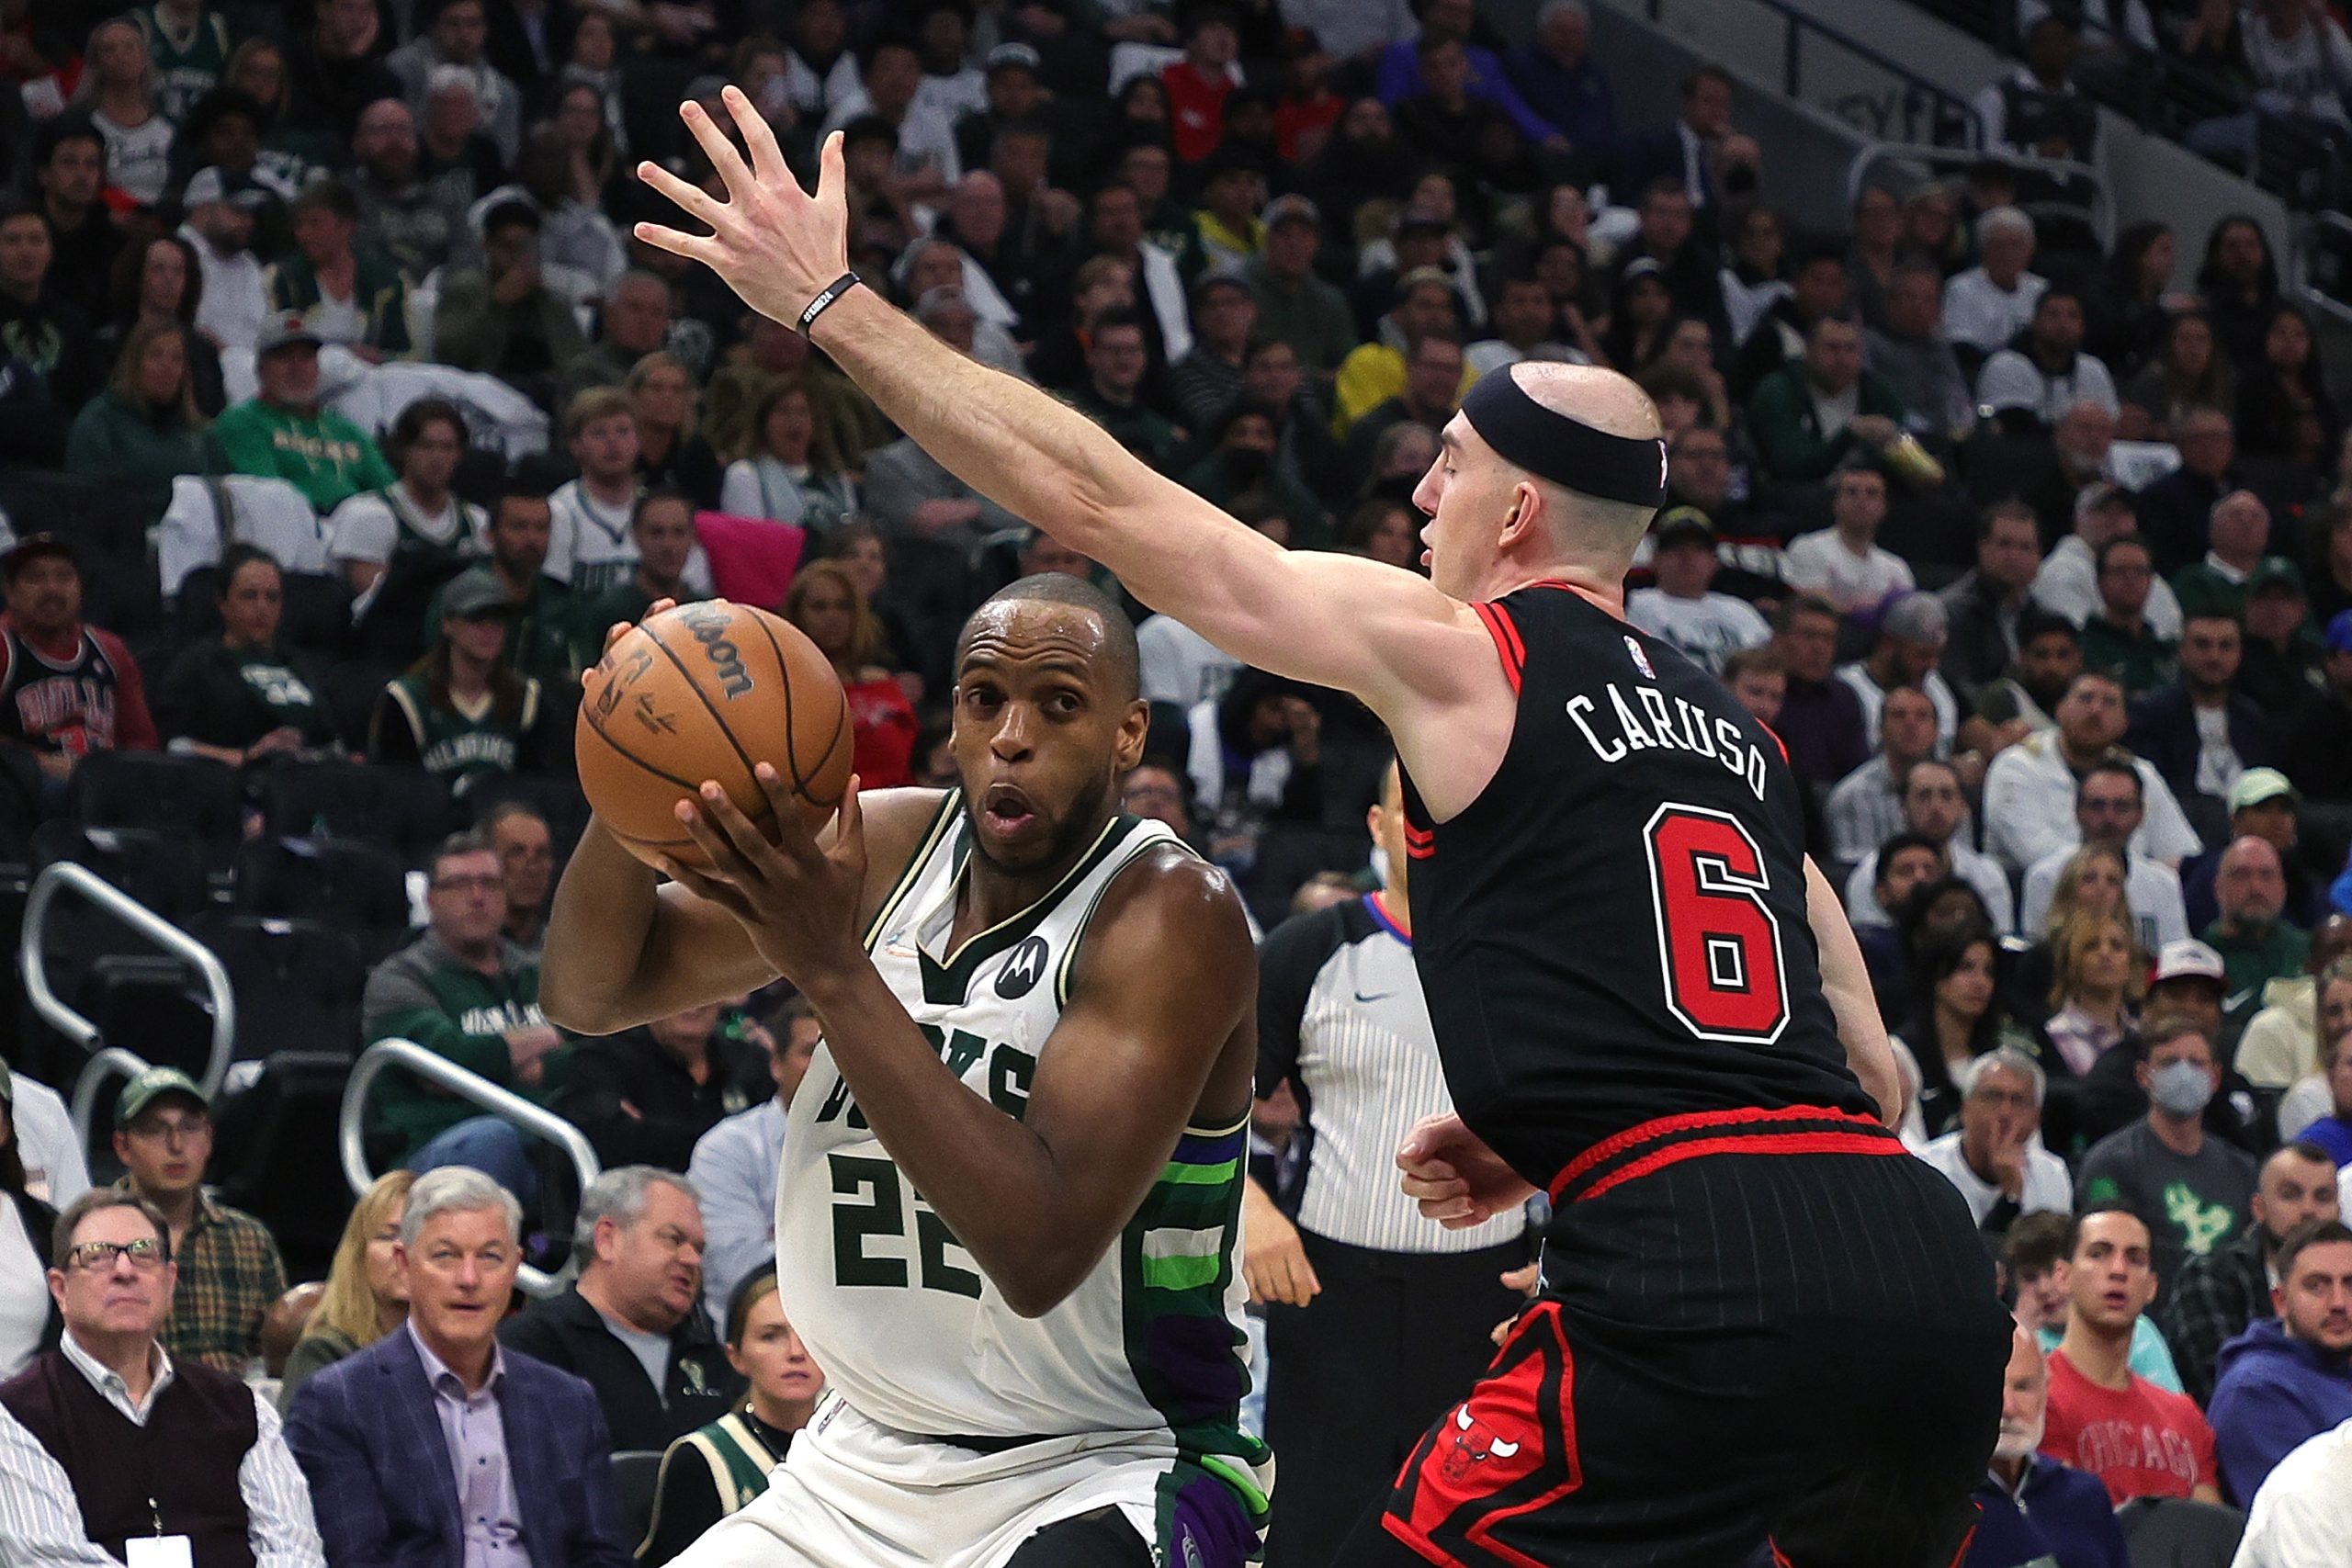 Khris Middleton of the Milwaukee Bucks is defended by Alex Caruso of the Chicago Bulls.